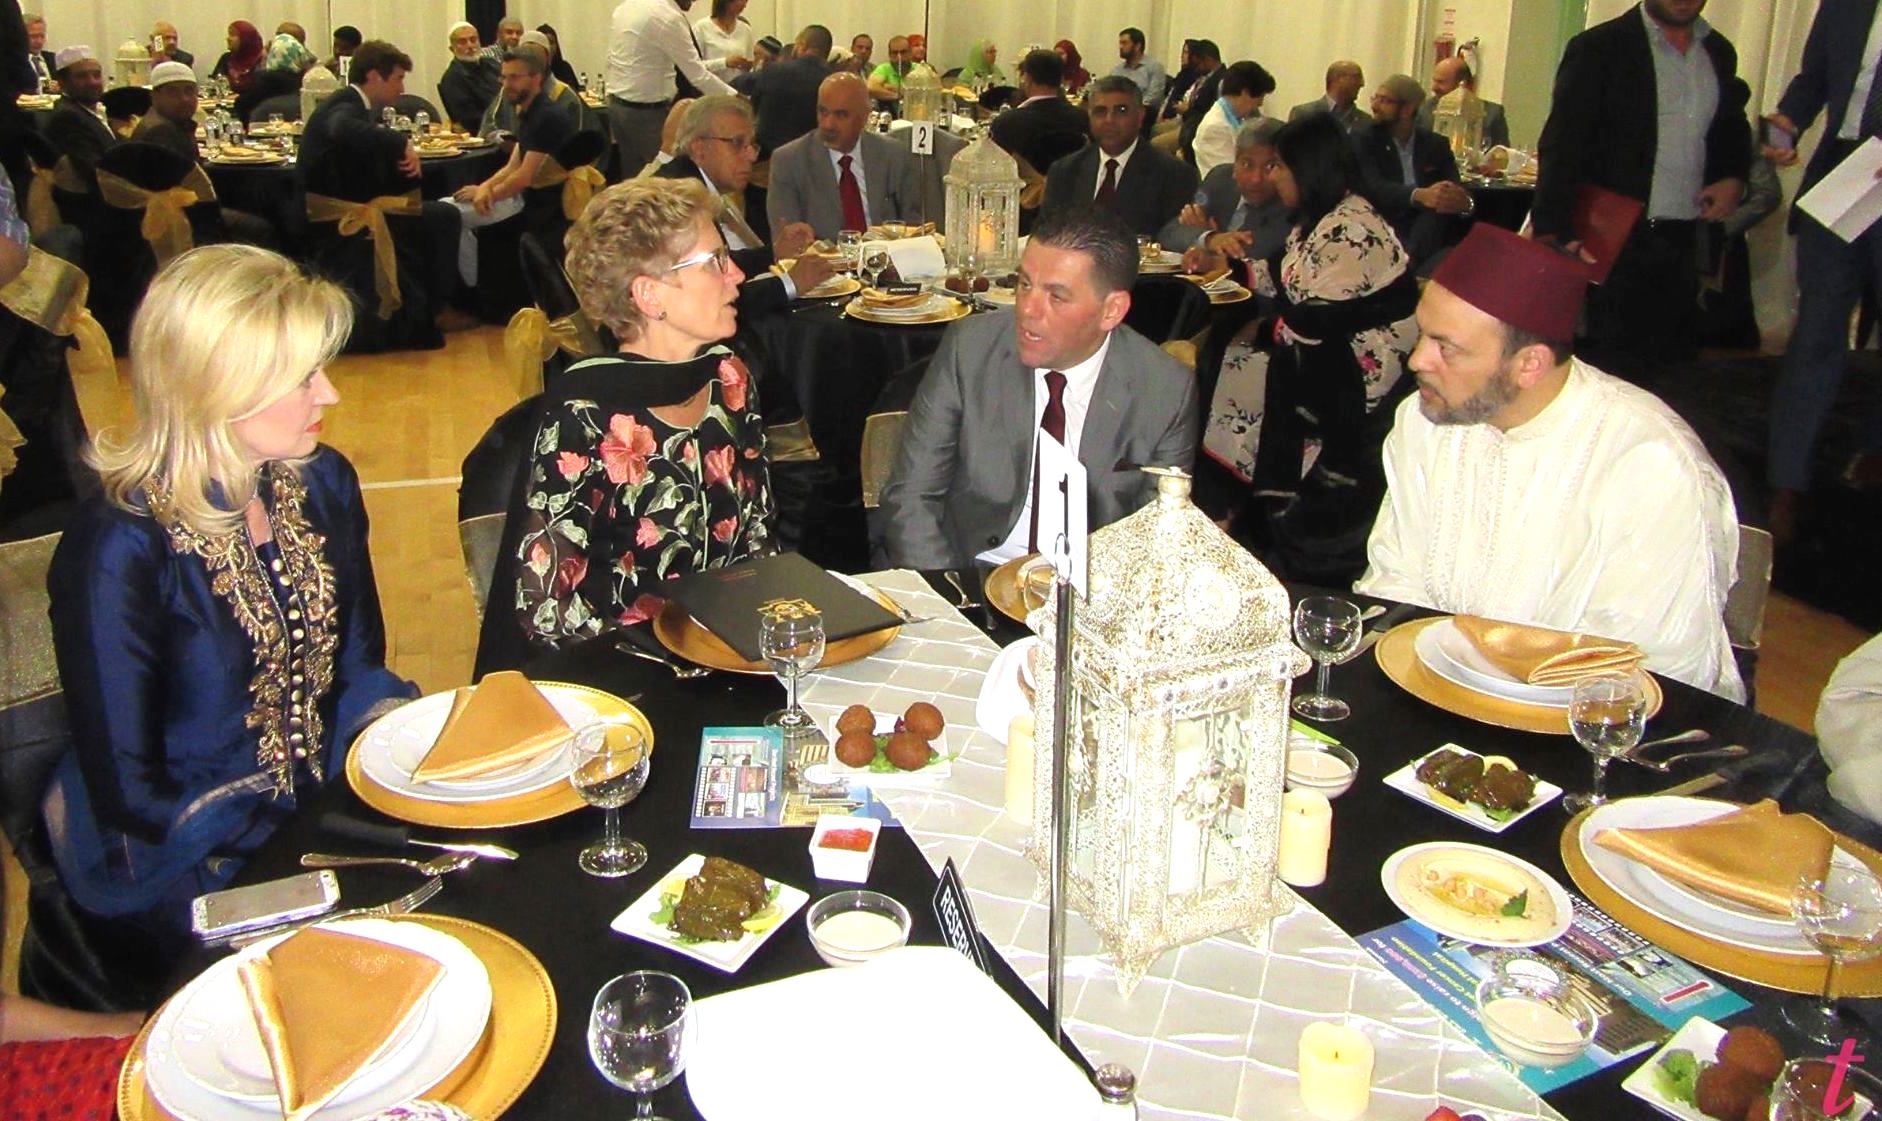 Ontario Premier fasts in solidarity with Muslims